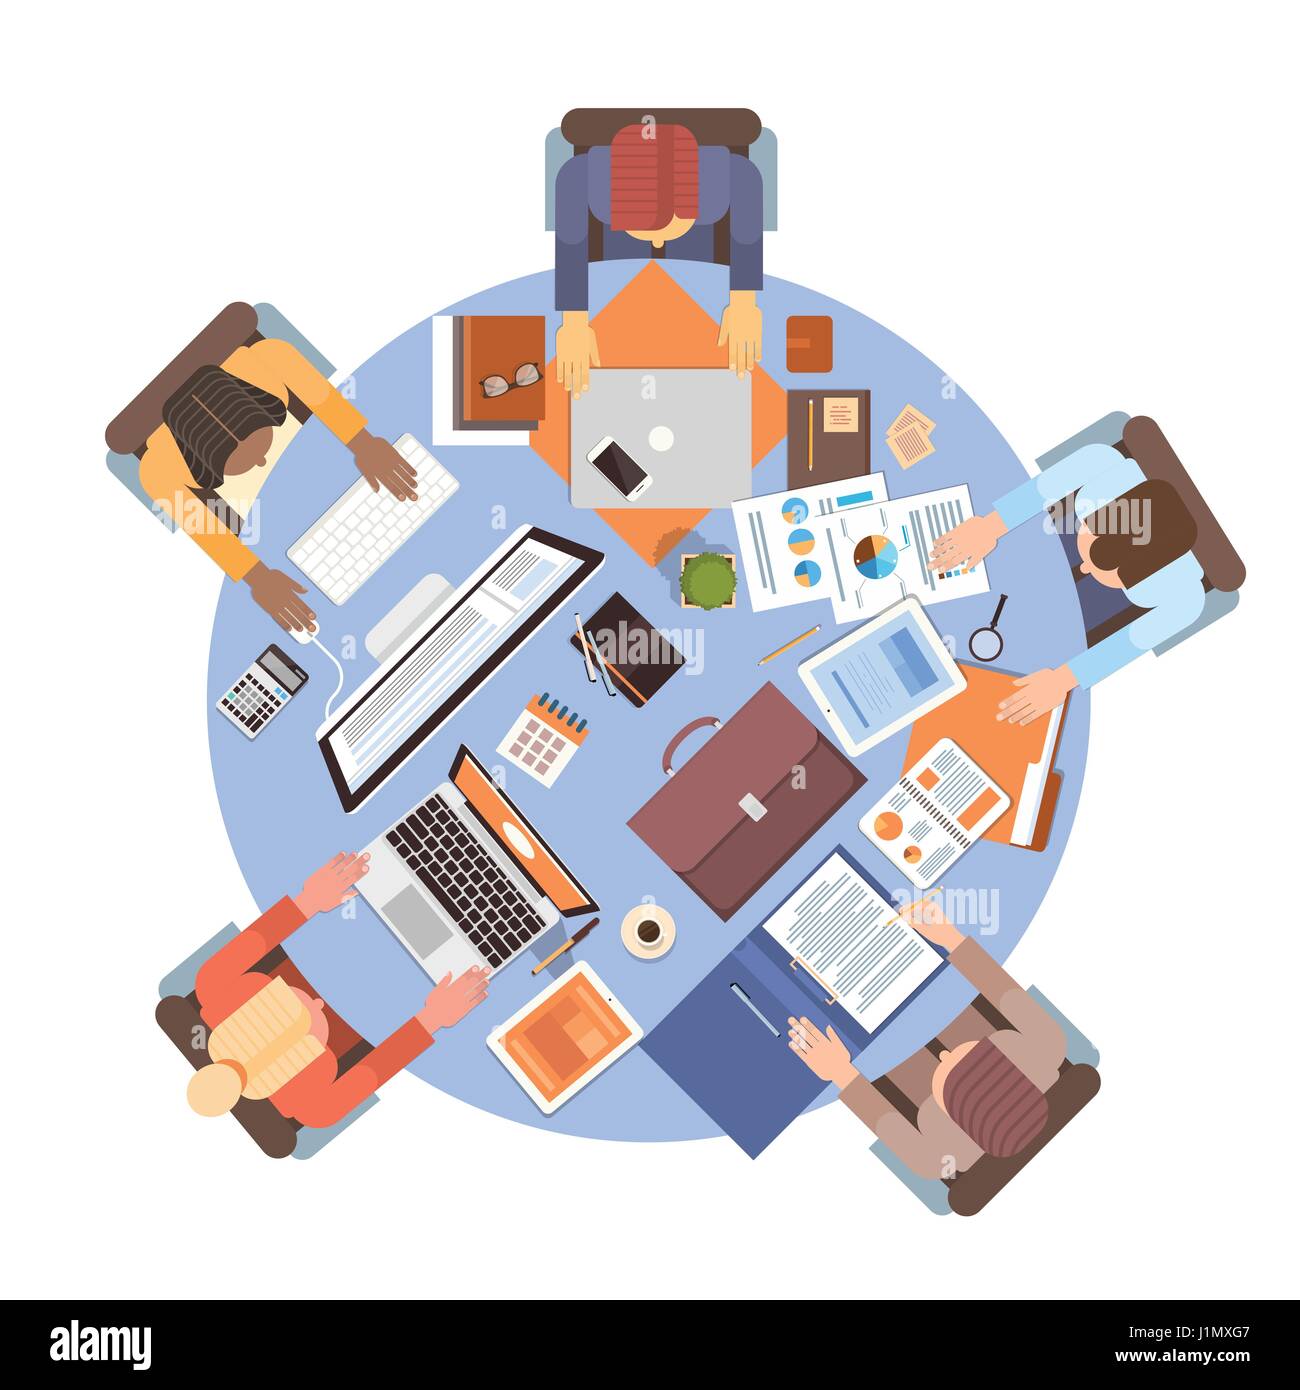 People Using Computers Businesspeople Workplace Desk Top Angle View Teamwork Stock Vector